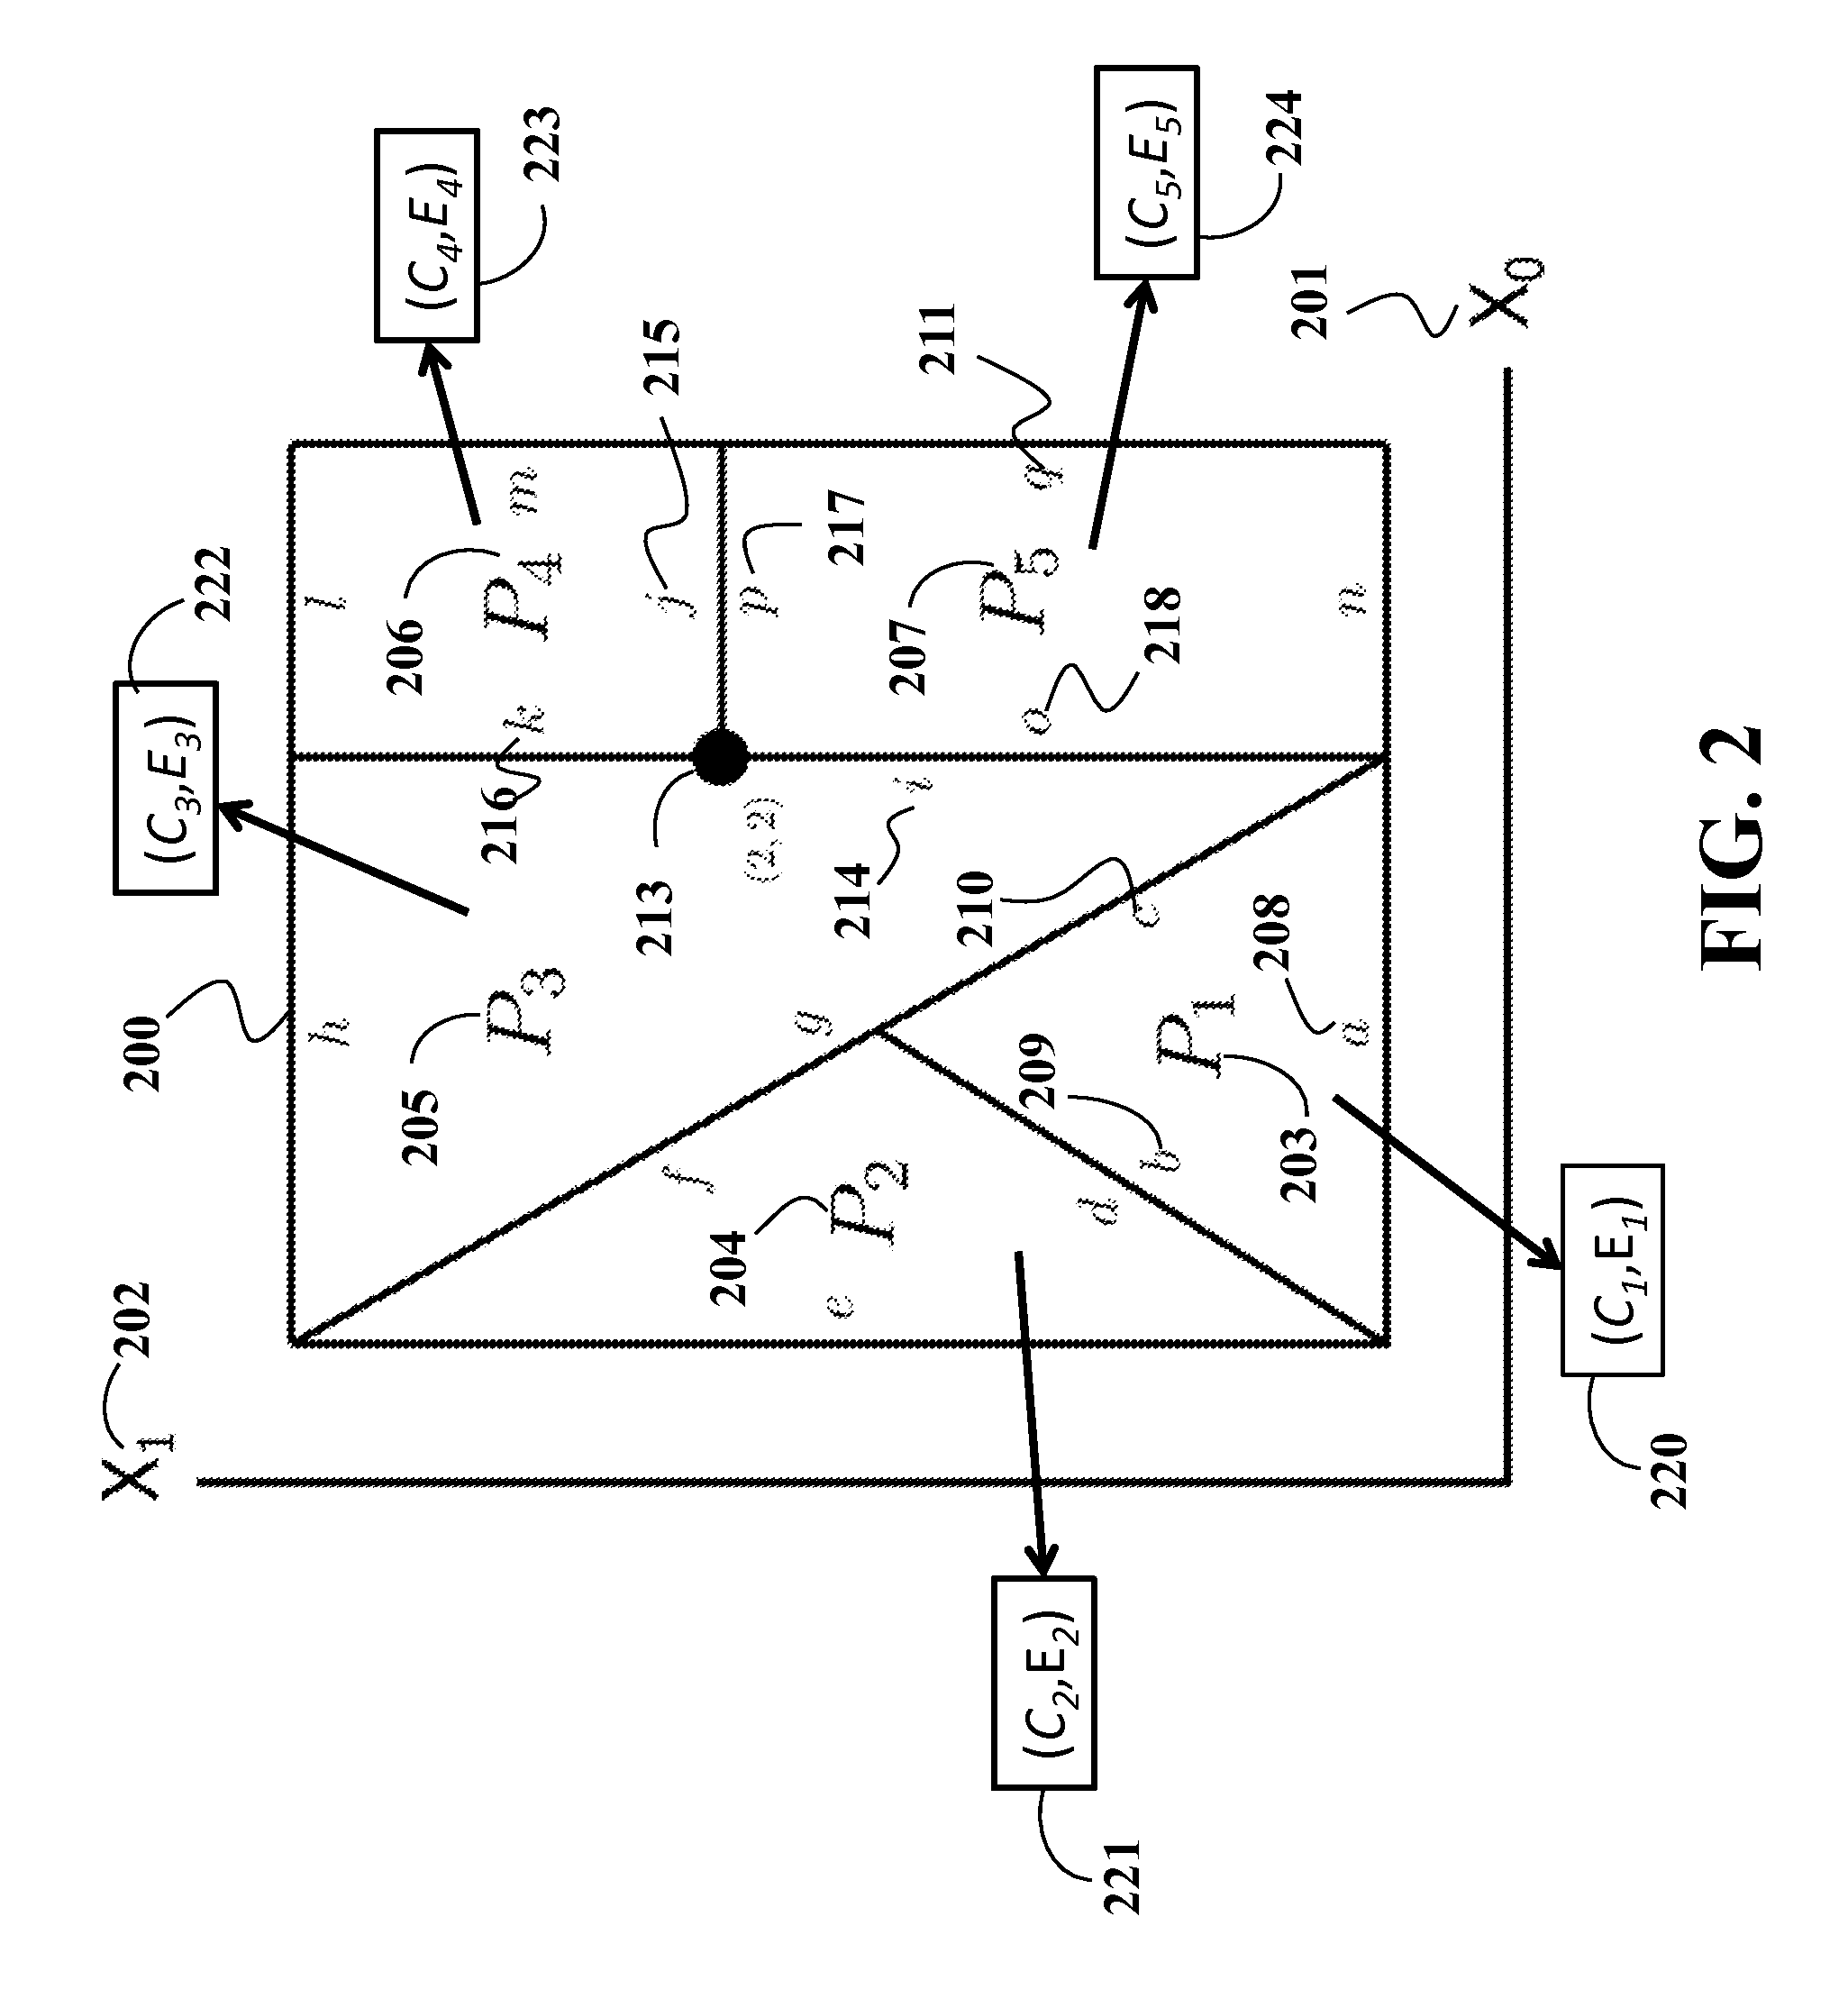 System and Method for Explicit Model Predictive Control